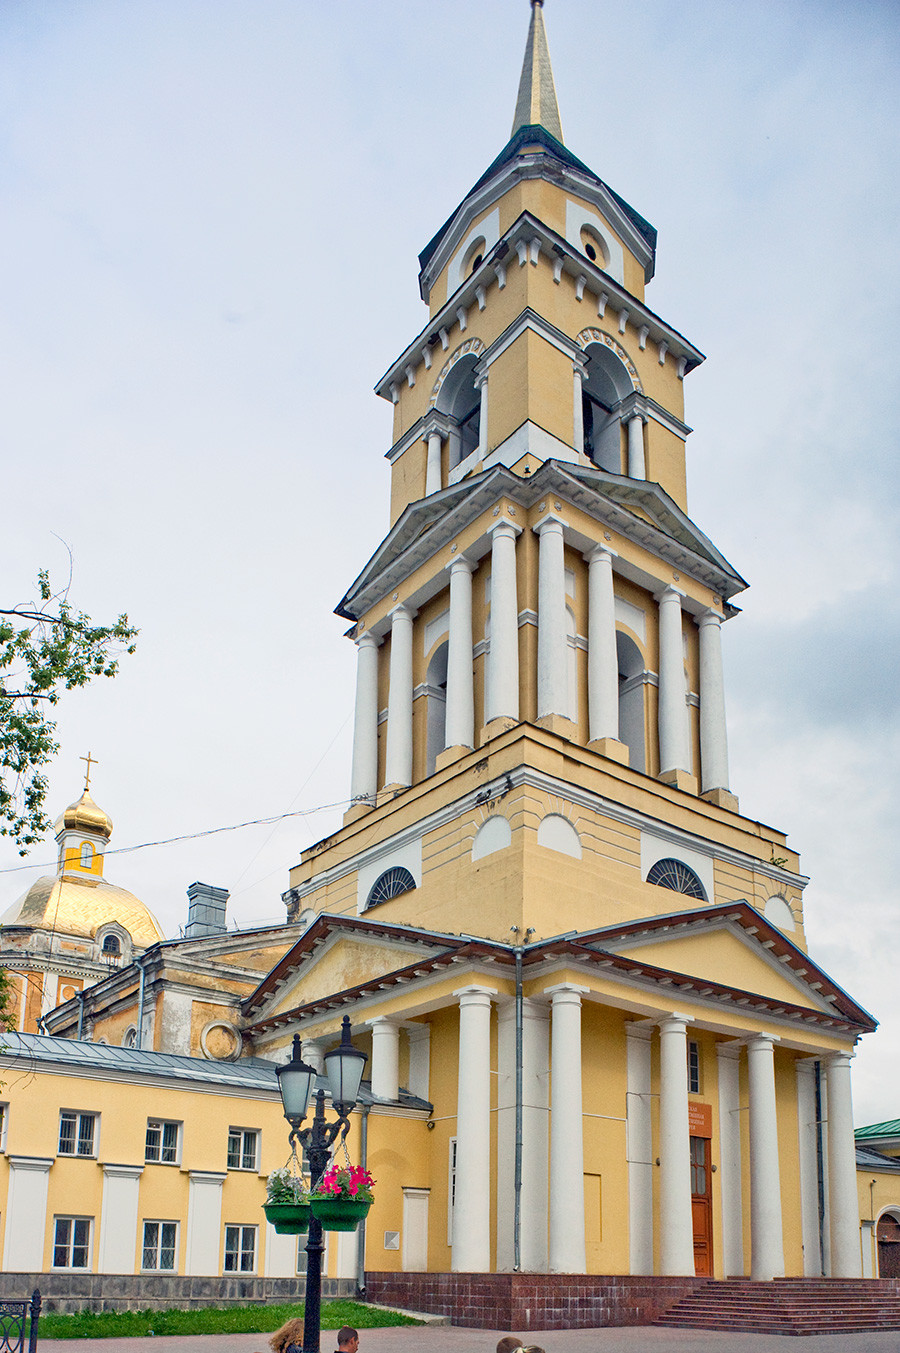 Bell tower of the Cathedral of the Transfiguration of the Savior. June 15, 2014